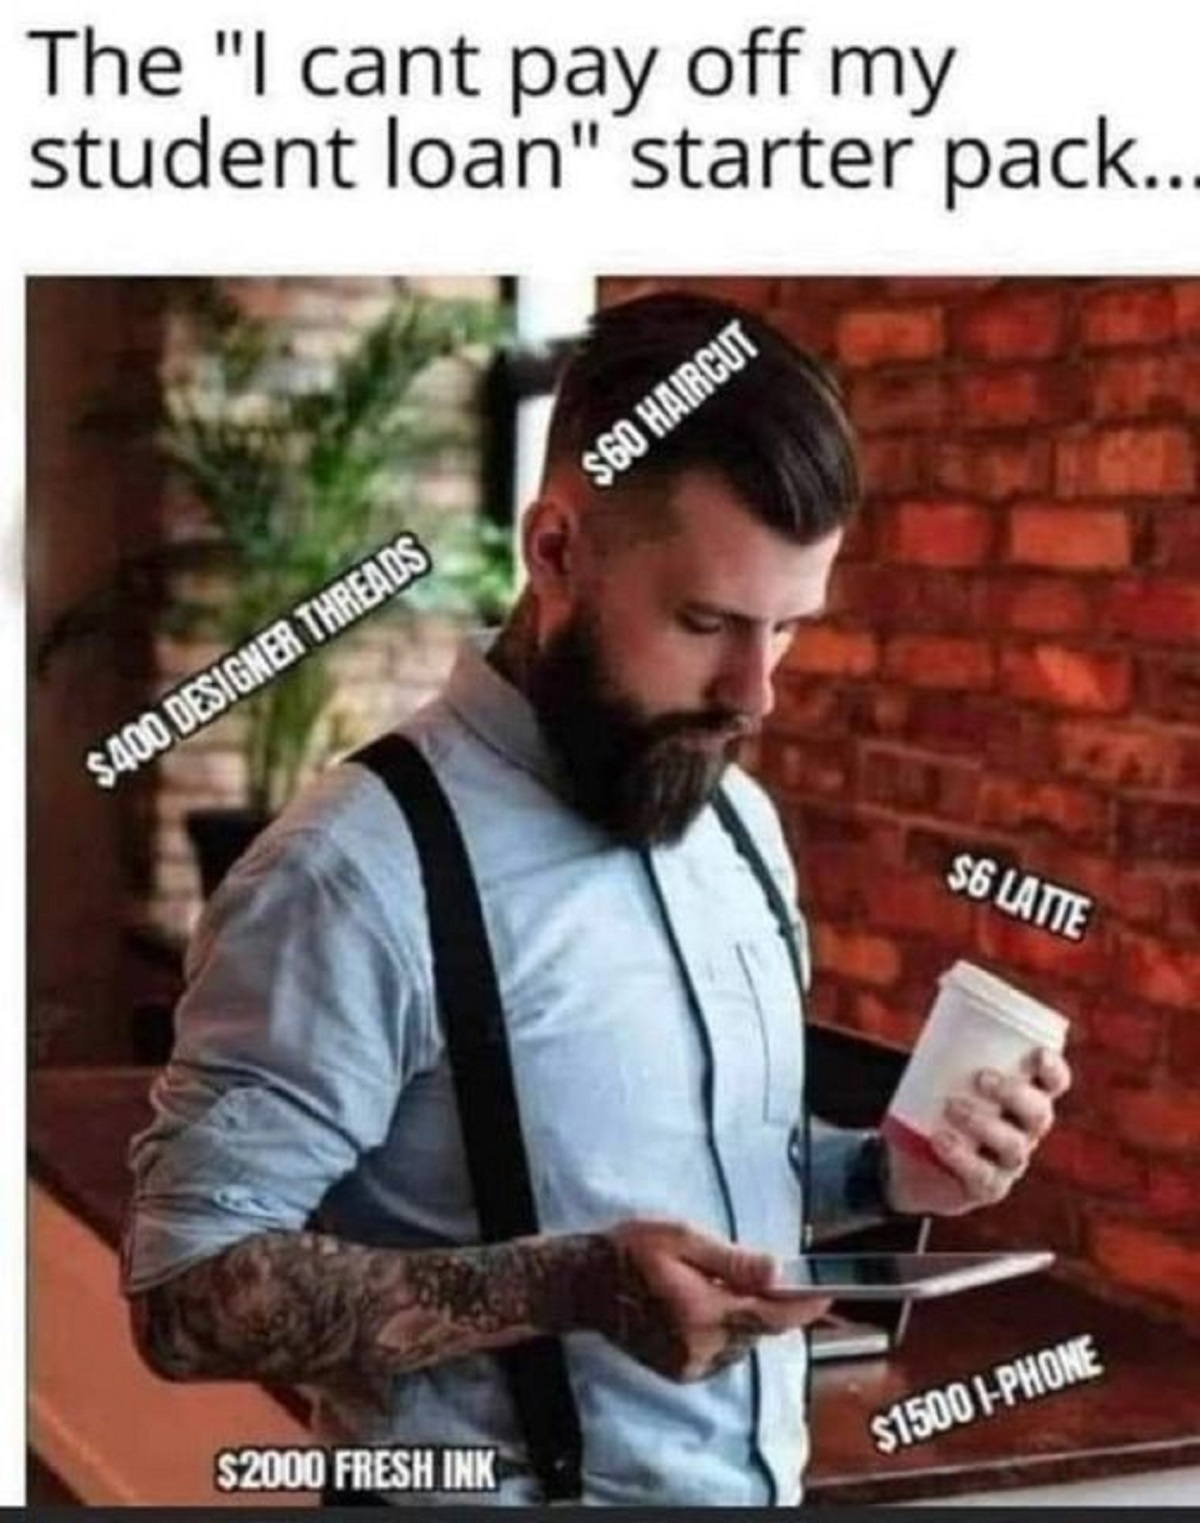 photo caption - The "I cant pay off my student loan" starter pack.. $400 Designer Threads $2000 Fresh Ink $60 Haircut $6 Latte $1500 IPhone